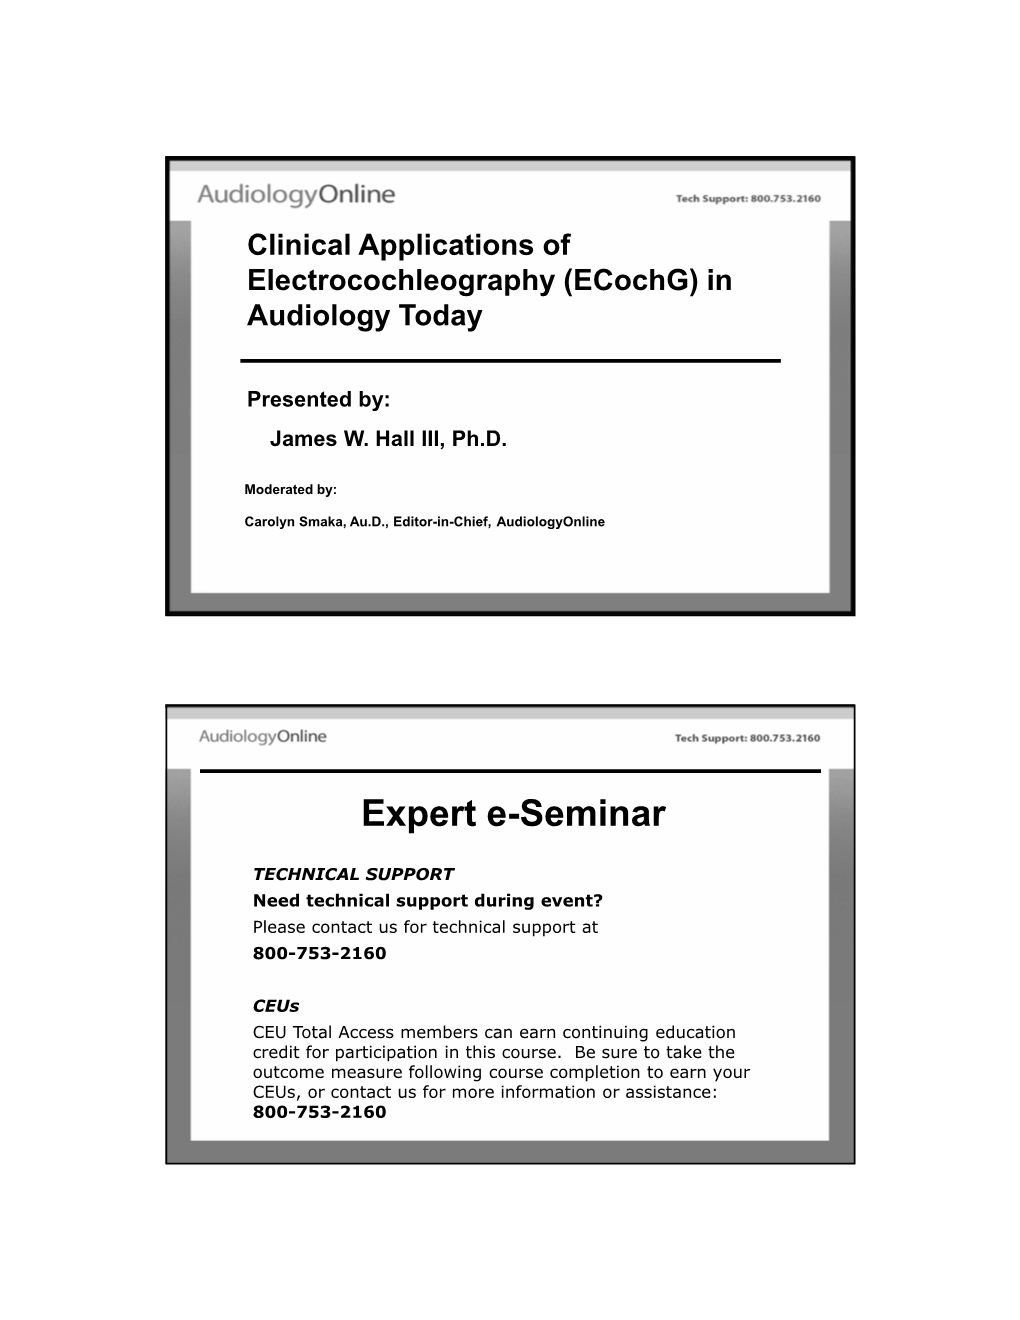 Clinical Applications of Electrocochleography (Ecochg) in Audiology Today